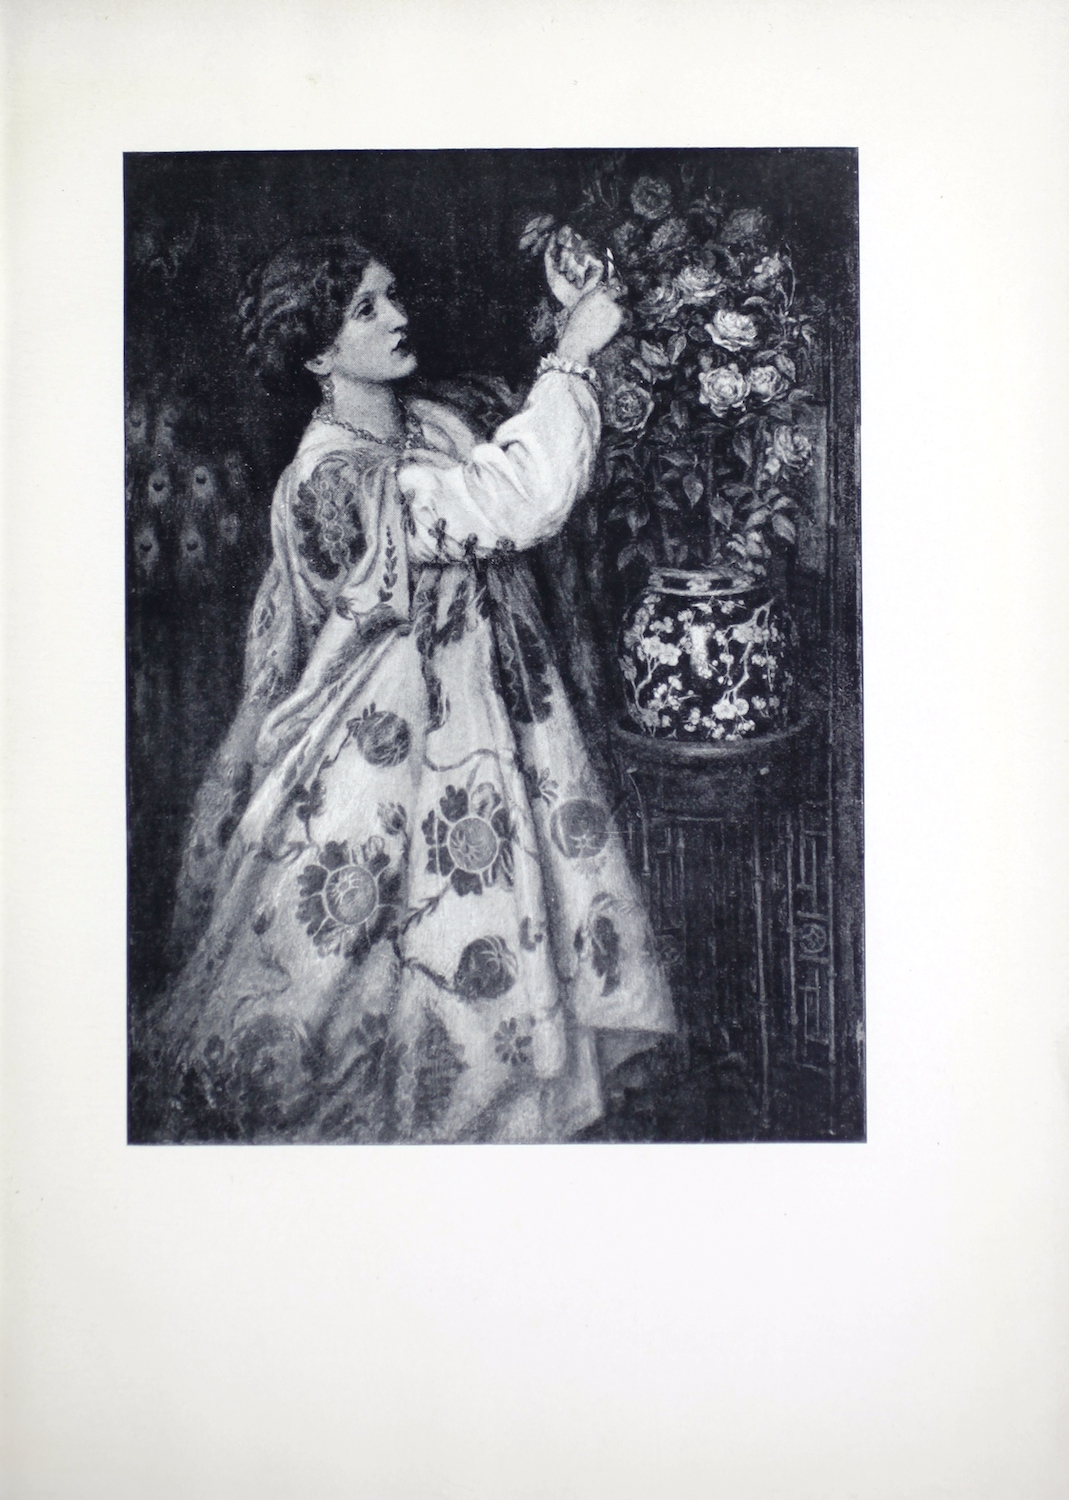 This black and white reproduction of Rossetti’s painting is of a woman, portrayed by Mrs. F. R. Leyland, arranging roses at home. The woman is in three-quarter profile and wears an elaborate floral dress with puffed sleeves. Her hair is tied in a braid behind her head. She arranges a large bouquet of flowers in a Japanese-inspired ceramic vase (blue and white export porcelain). The vase rests in a terra cotta pot on a bamboo plant stand. It sits in the corner of a room. The dark walls (green in the original oil painting) fill the background with two bags hanging behind the woman’s head to the left of the image. The larger bag features a peacock pattern that is still visible in this reproduction. The smaller blue bag above it blends into the background.